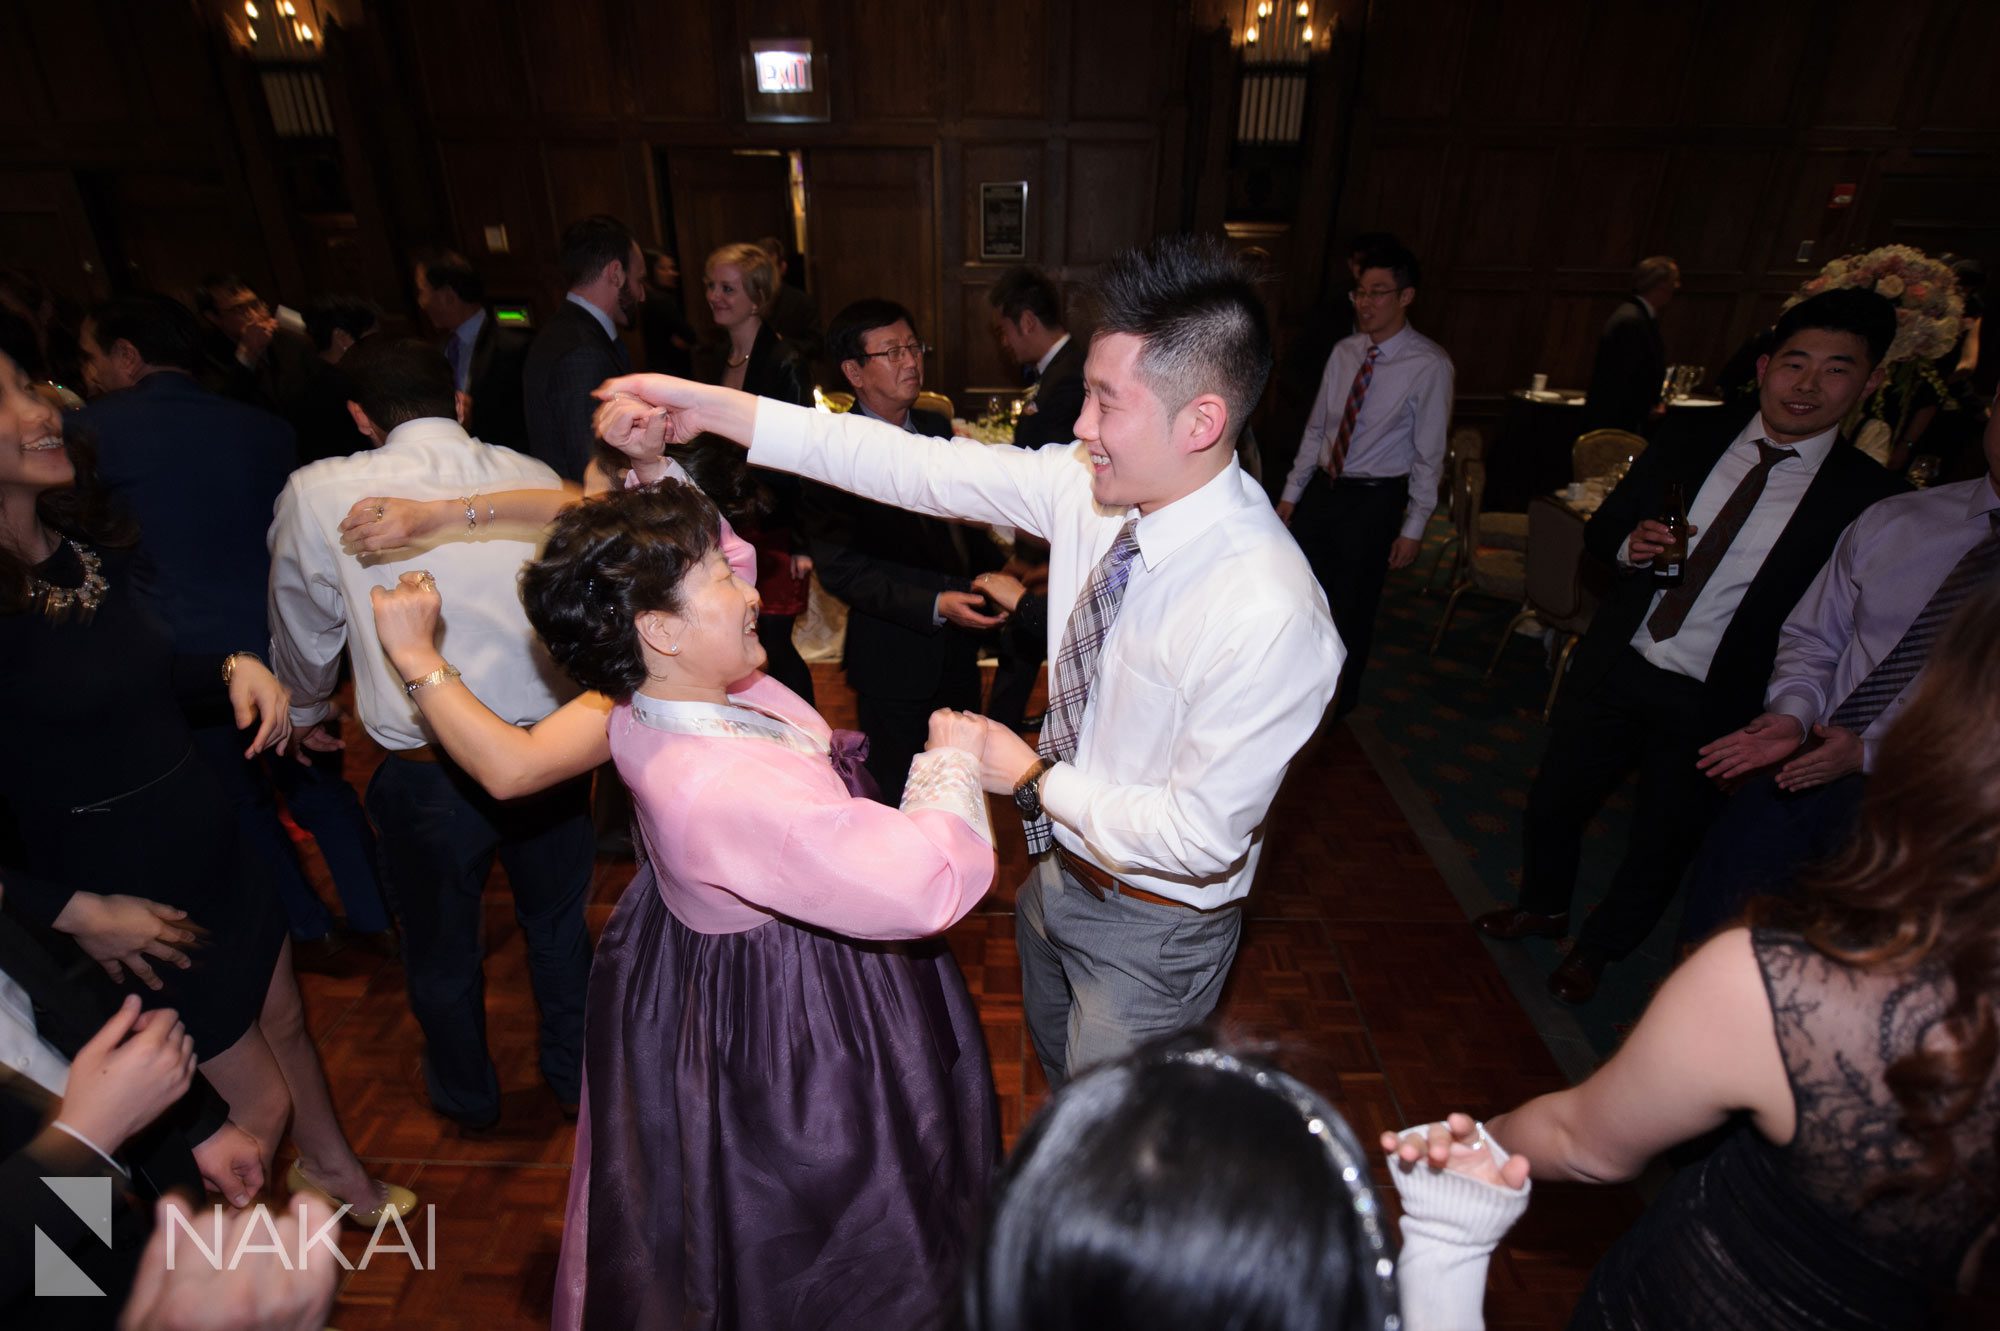 Intercontinental-Magnificent-Mile-wedding-reception-pictures-nakai-photography-57